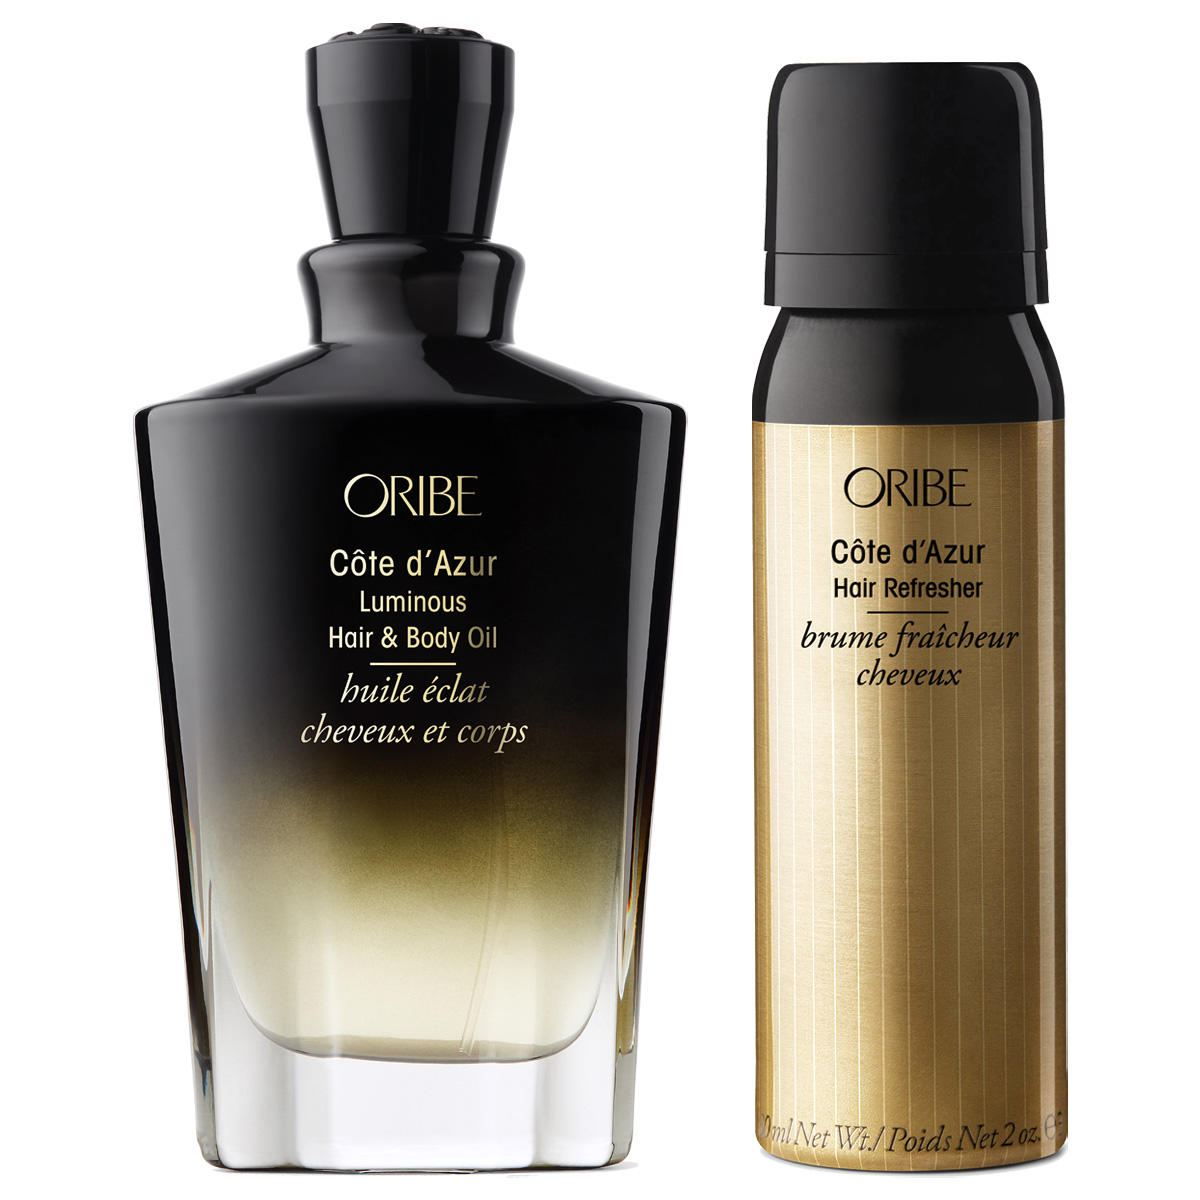 Oribe Côte d'Azur Luminous Hair Care and Styling Set  - 1